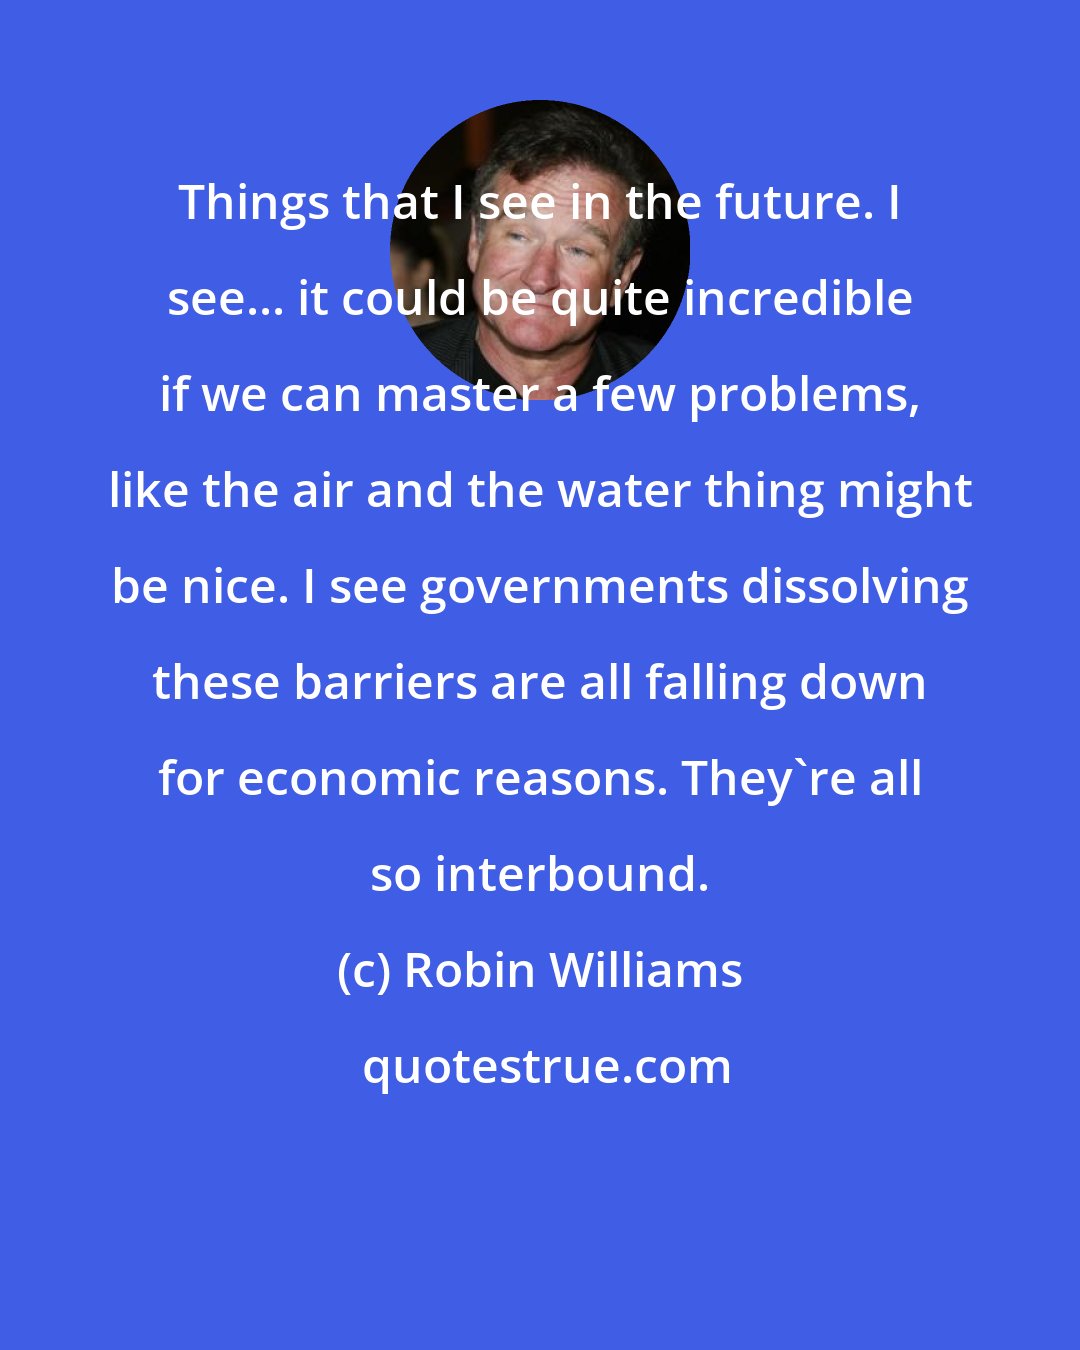 Robin Williams: Things that I see in the future. I see... it could be quite incredible if we can master a few problems, like the air and the water thing might be nice. I see governments dissolving these barriers are all falling down for economic reasons. They're all so interbound.